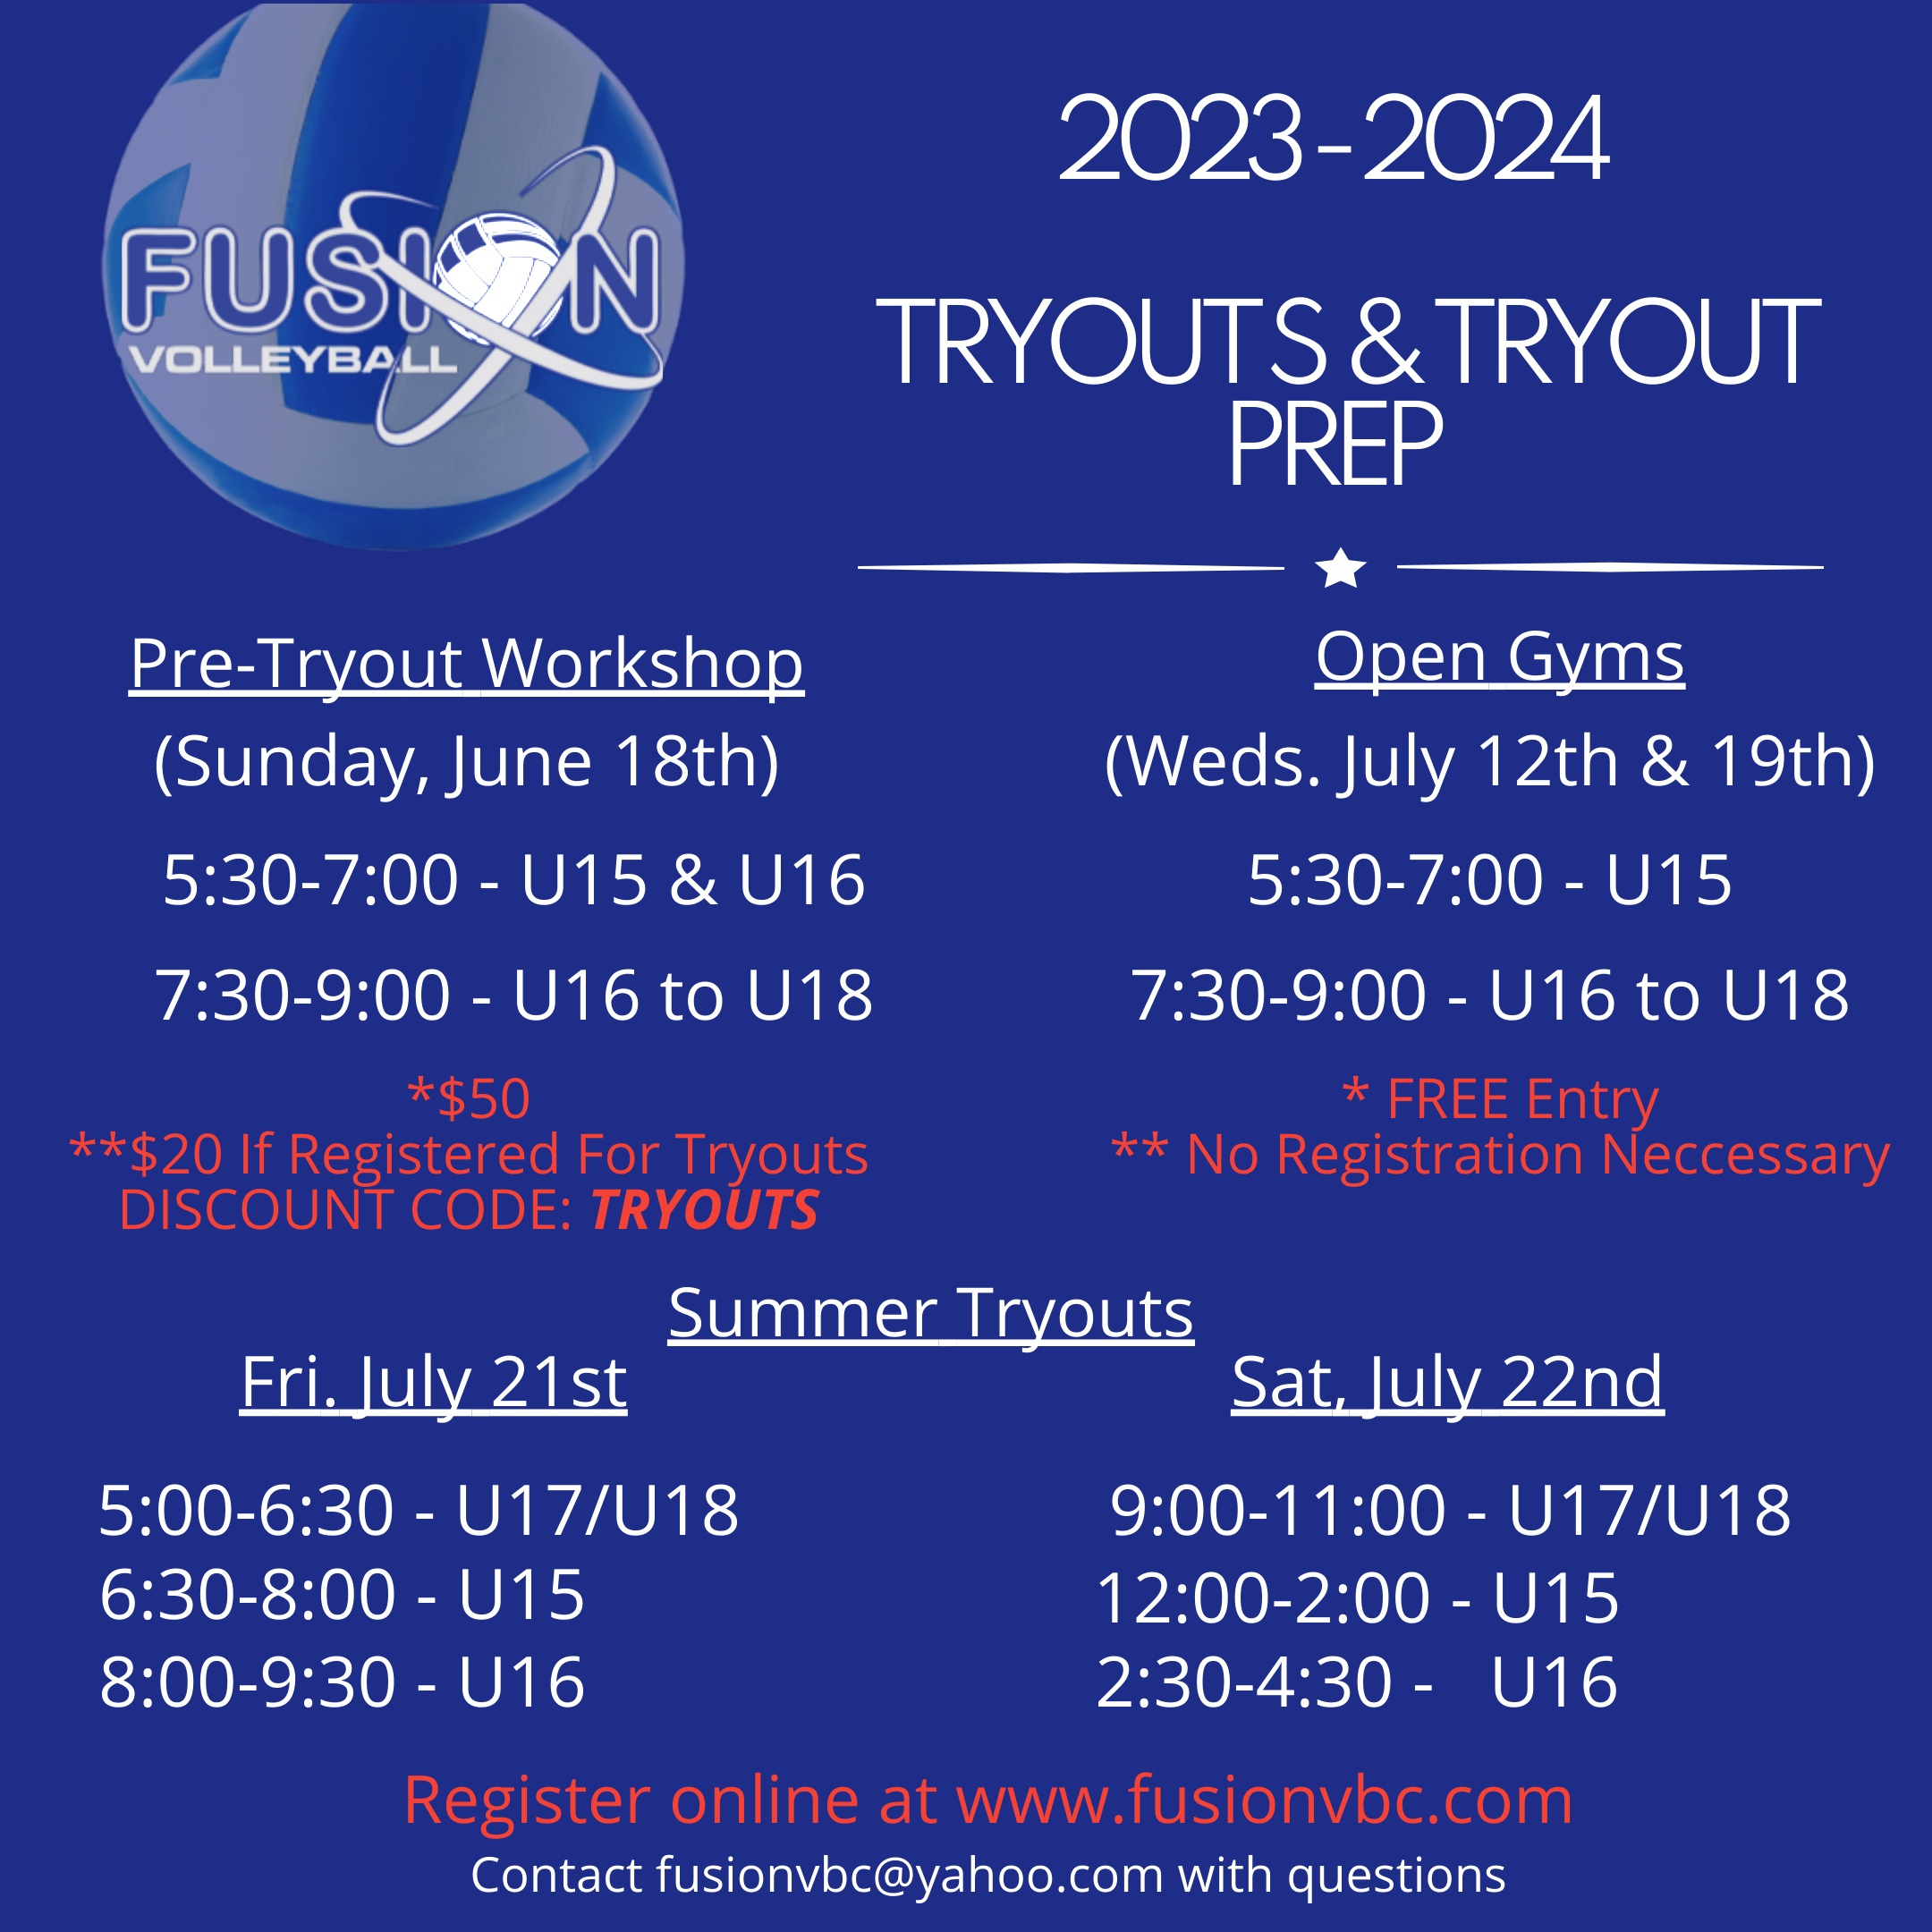 Tryout & Prep